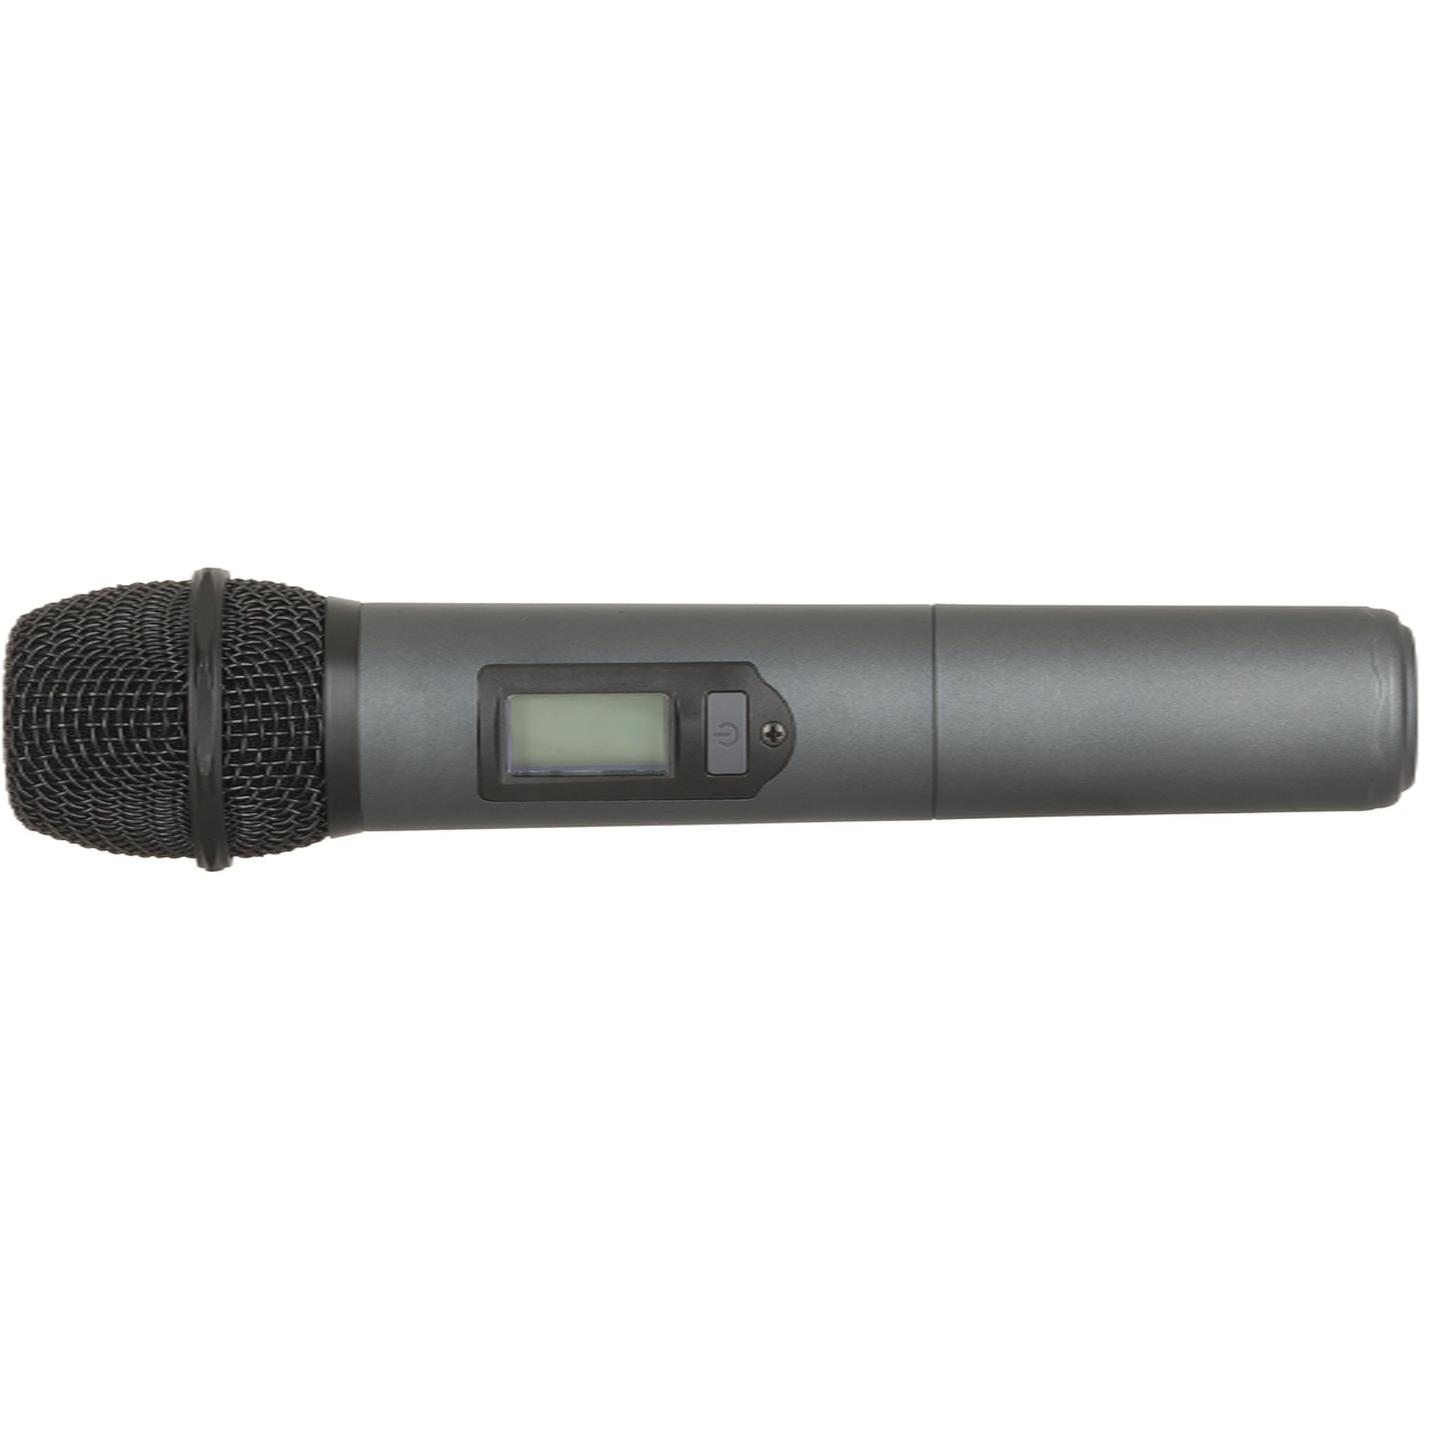 Spare Wireless UHF Microphone to suit AM4170